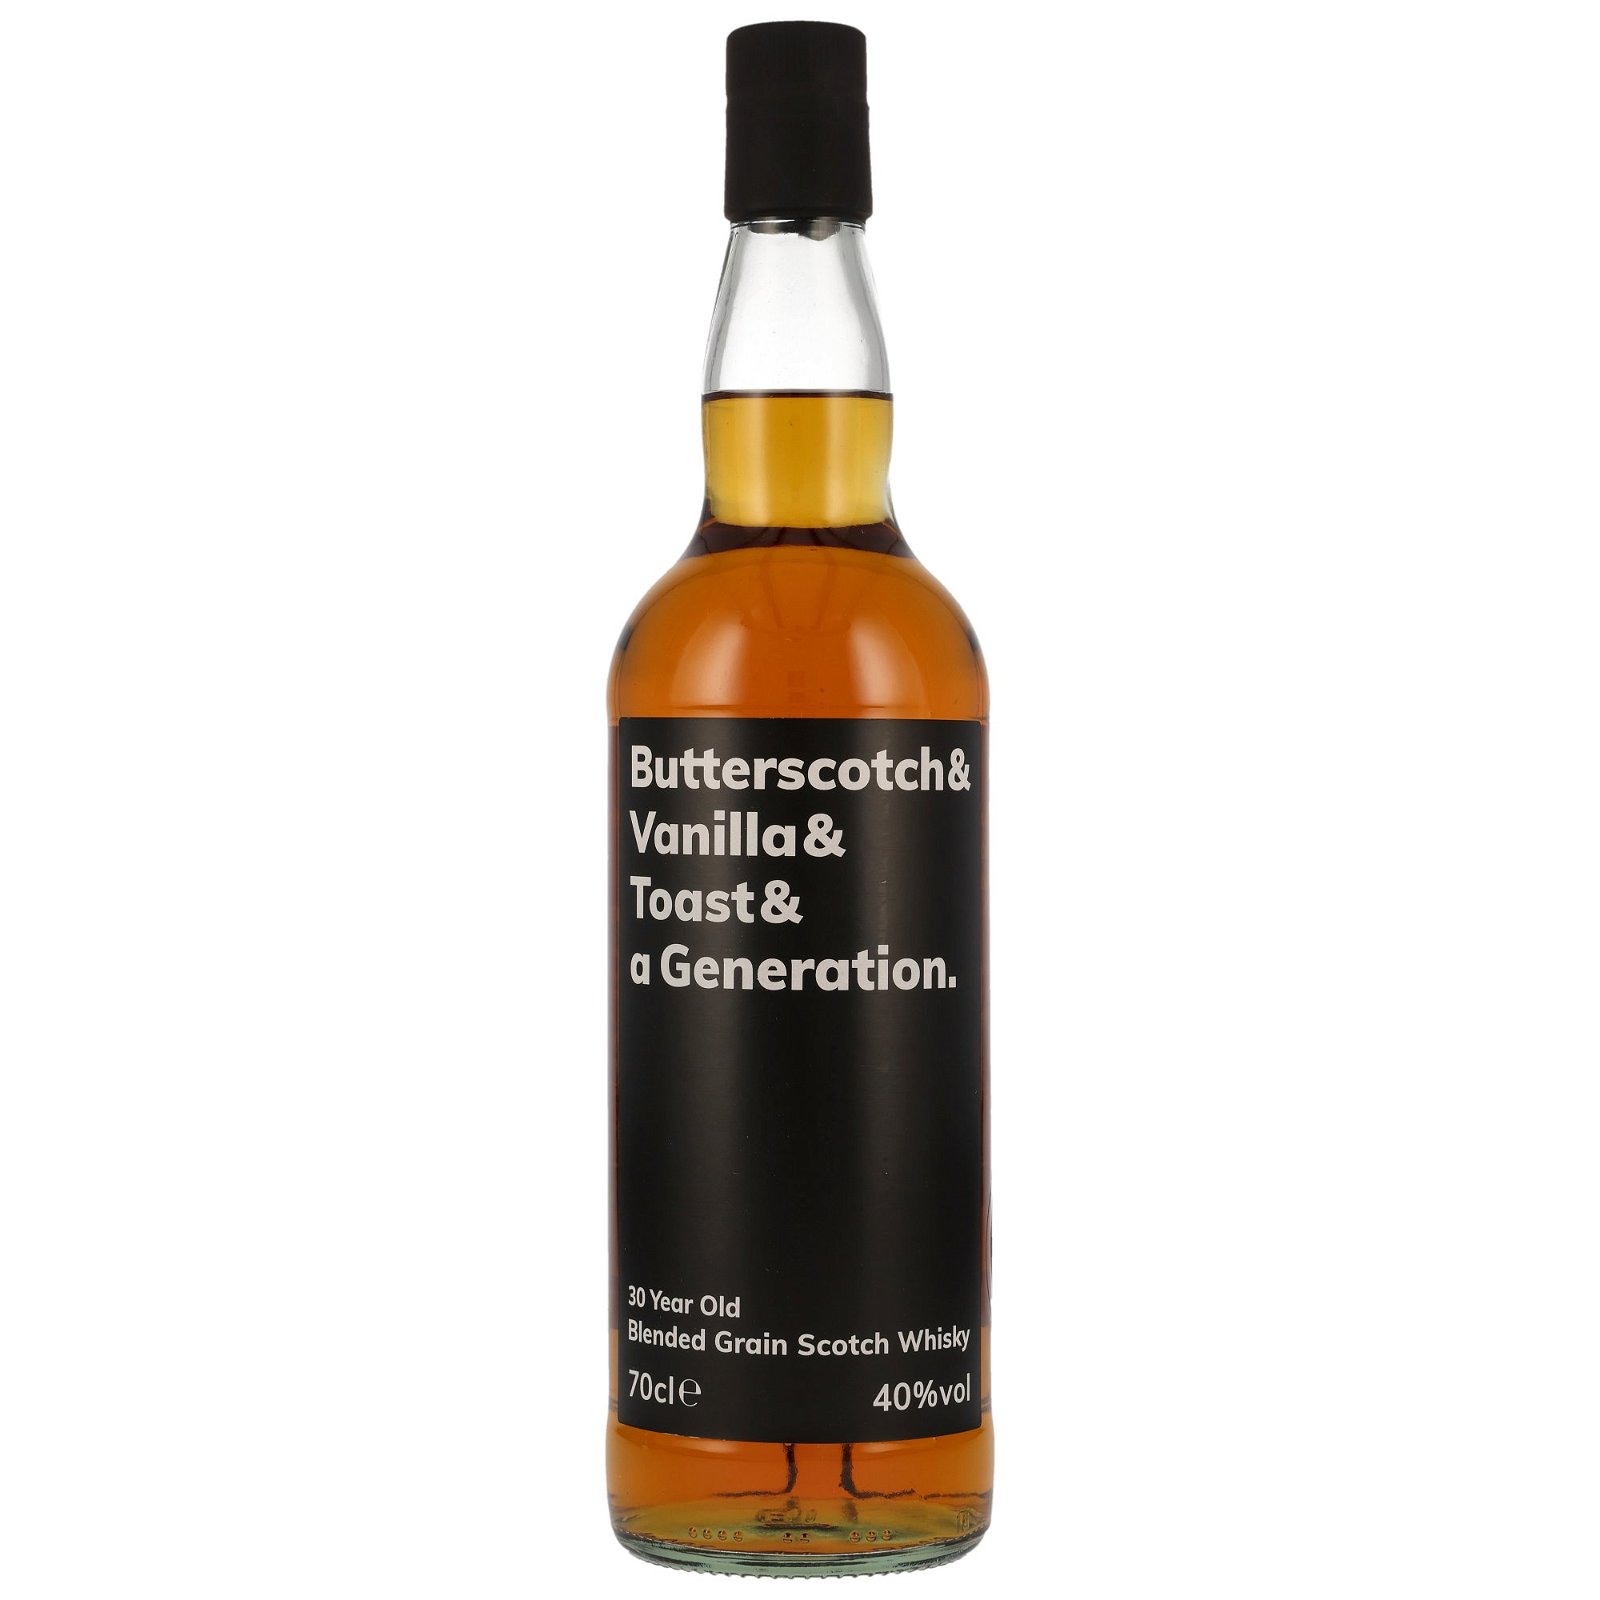 Butterscotch & Vanilla & Toast & a Generation 30 Jahre Blended Grain Scotch Whisky (Atom Labs)